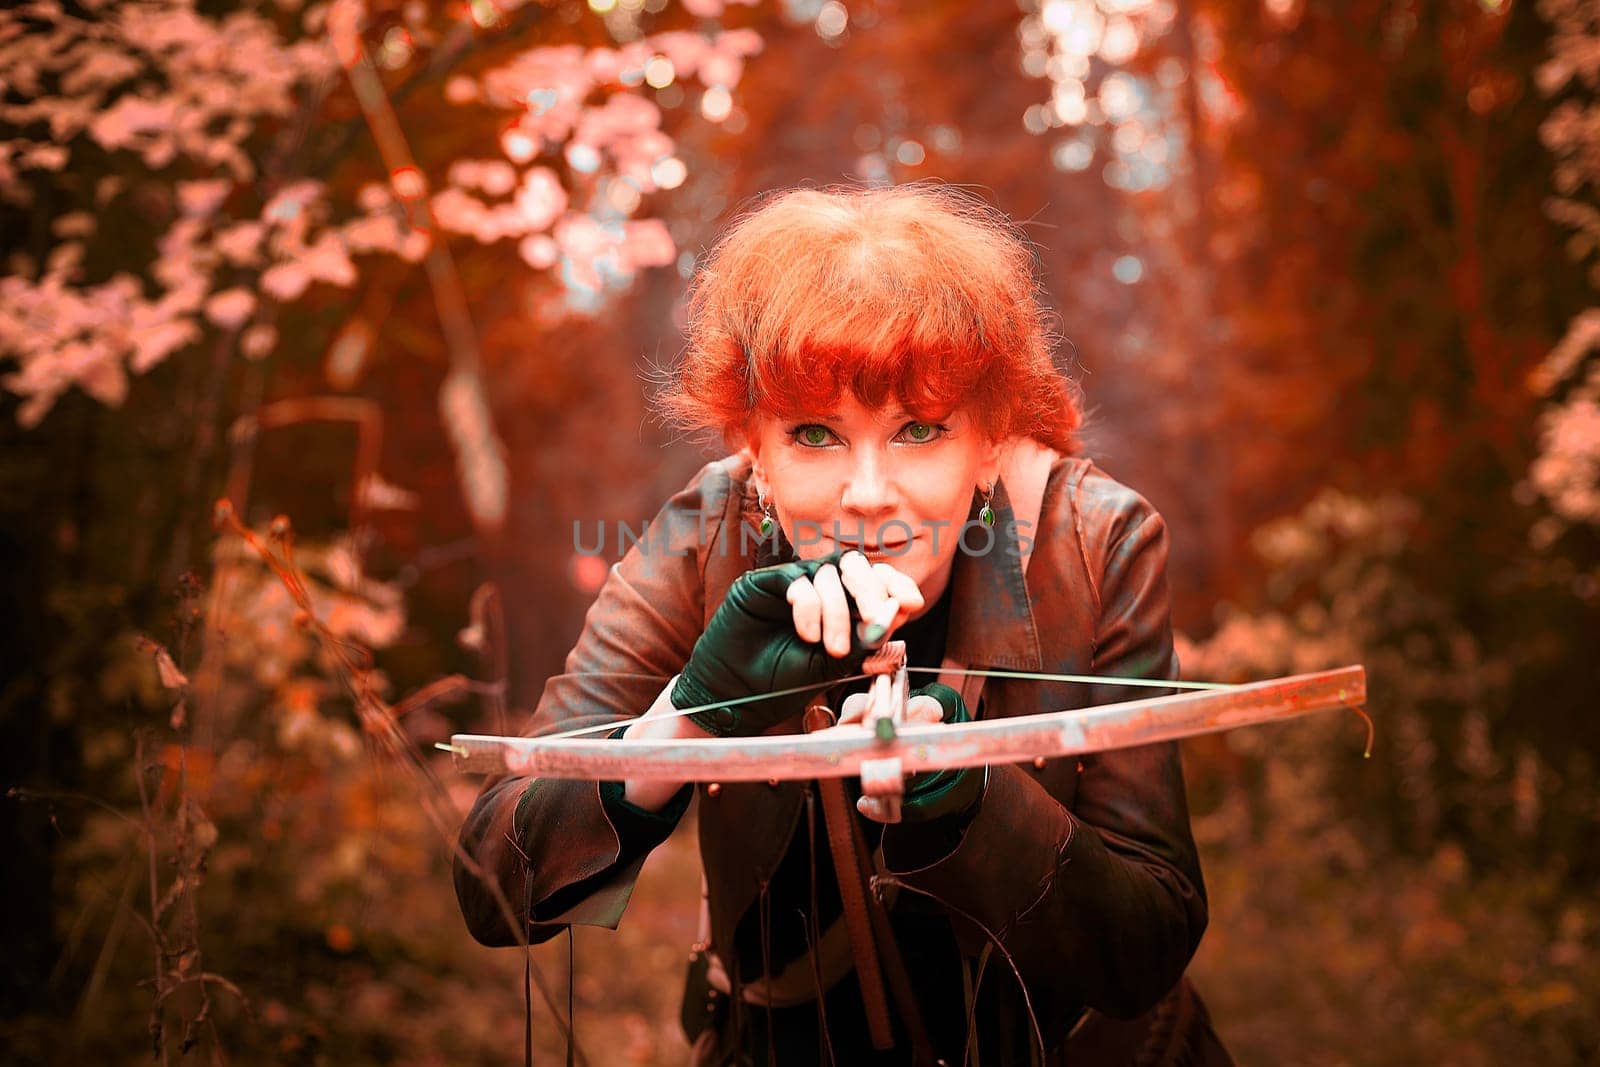 Mature model portraying a royal huntress with red curve hair is hunting with a crossbow in the in vibrant autumn forest in a thematic photo shoot by keleny